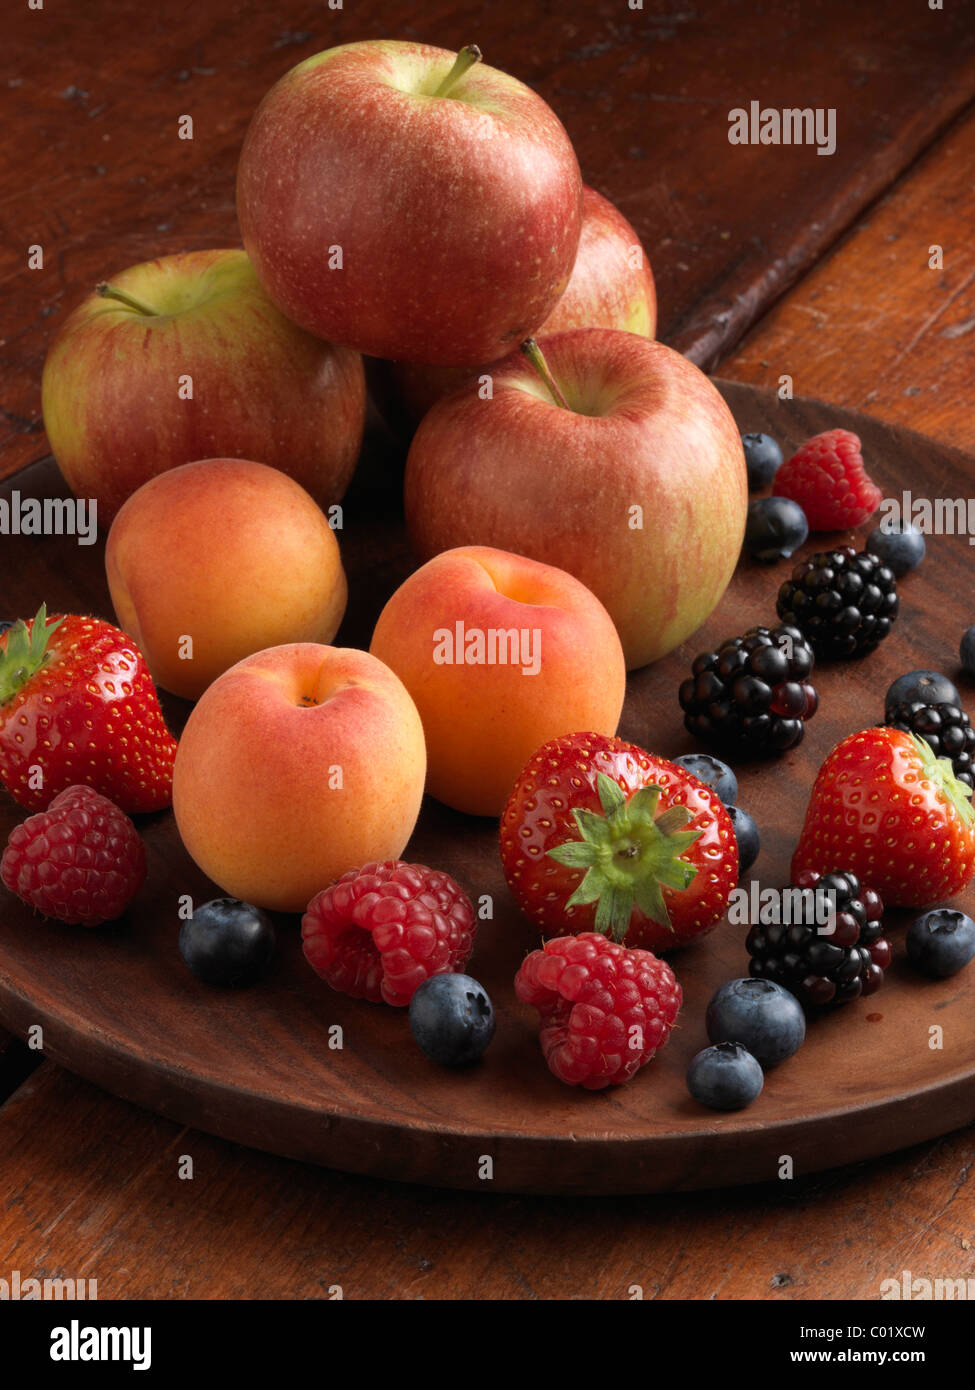 A pile of fresh ripe fruit apples strawberries blueberries blackberries raspberries and apricots Stock Photo